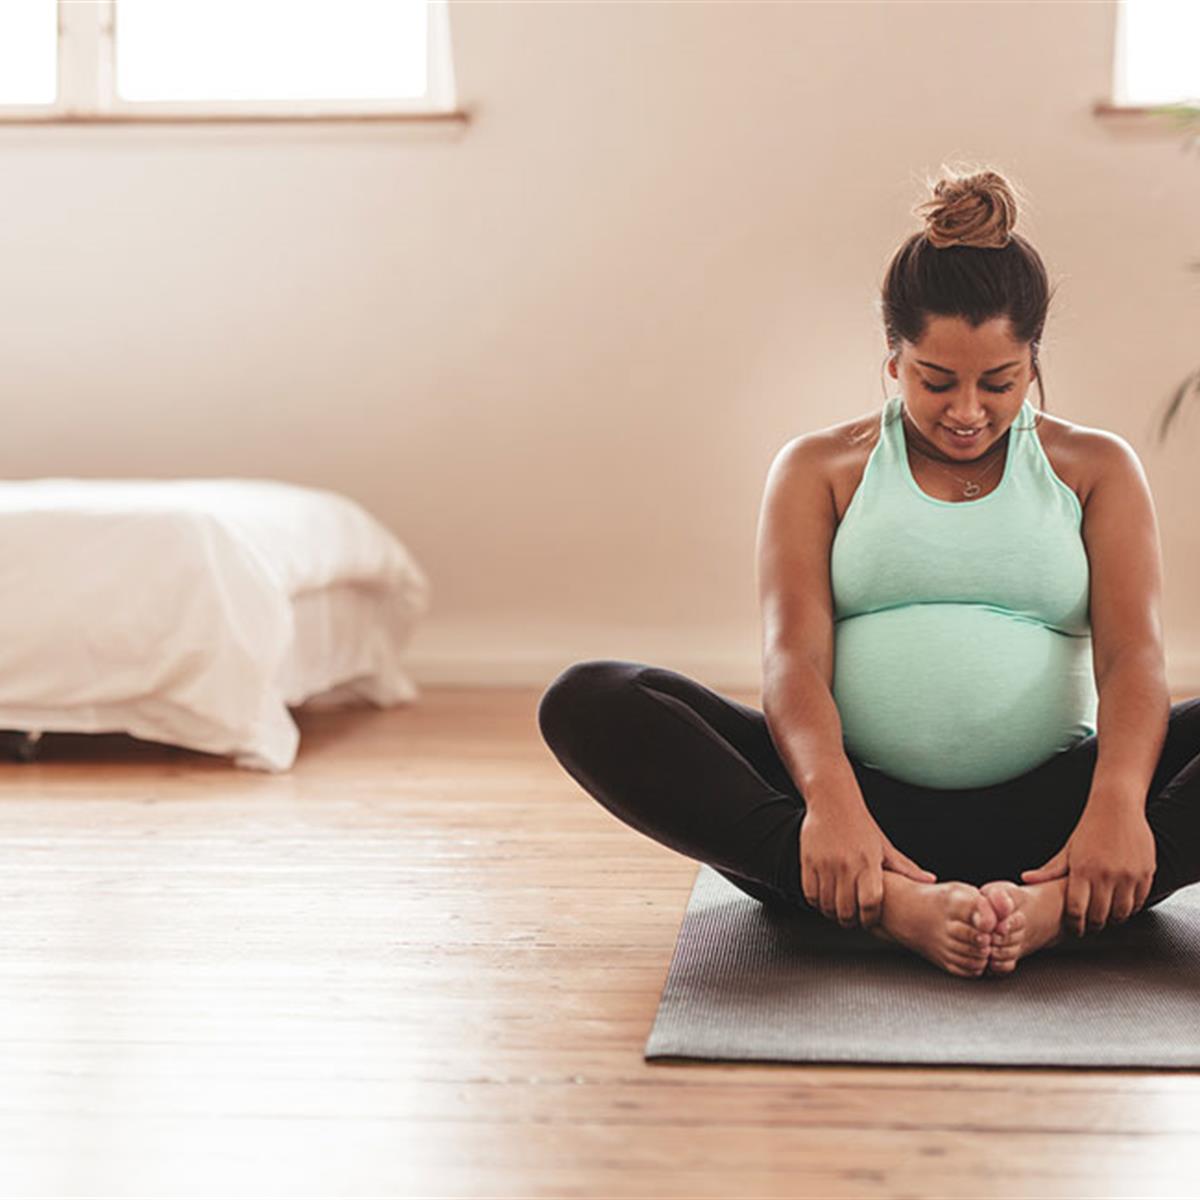 Pregnancy Exercise Guide for Athletes and Fit Women - Moms Into Fitness